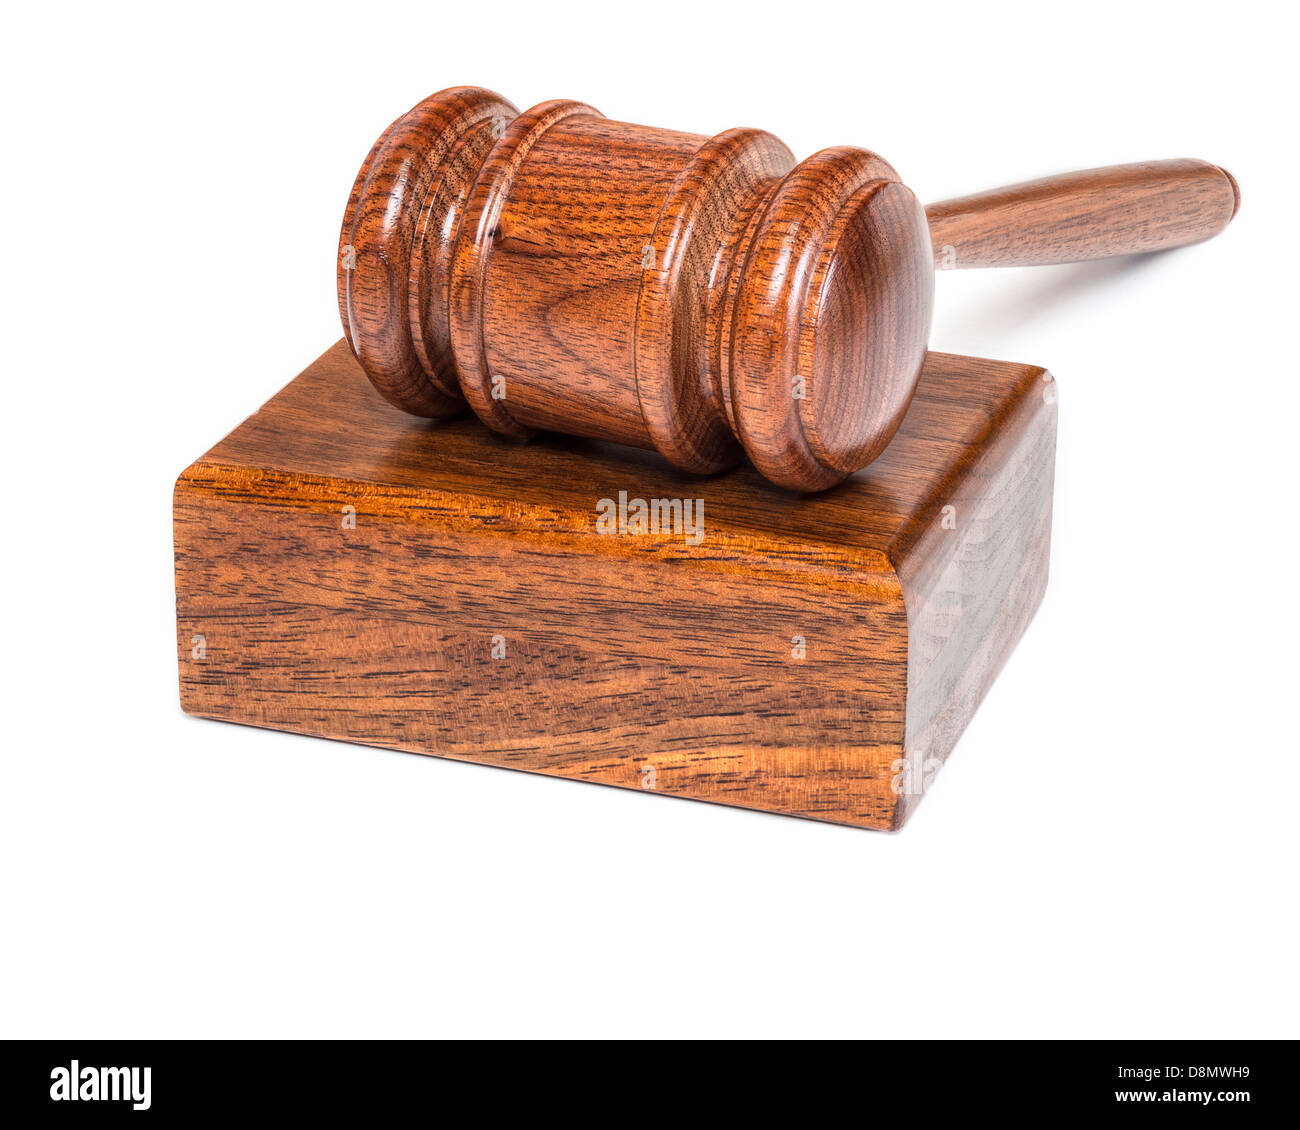 Gavel and sound block on white background with soft natural shadow. Stock Photo